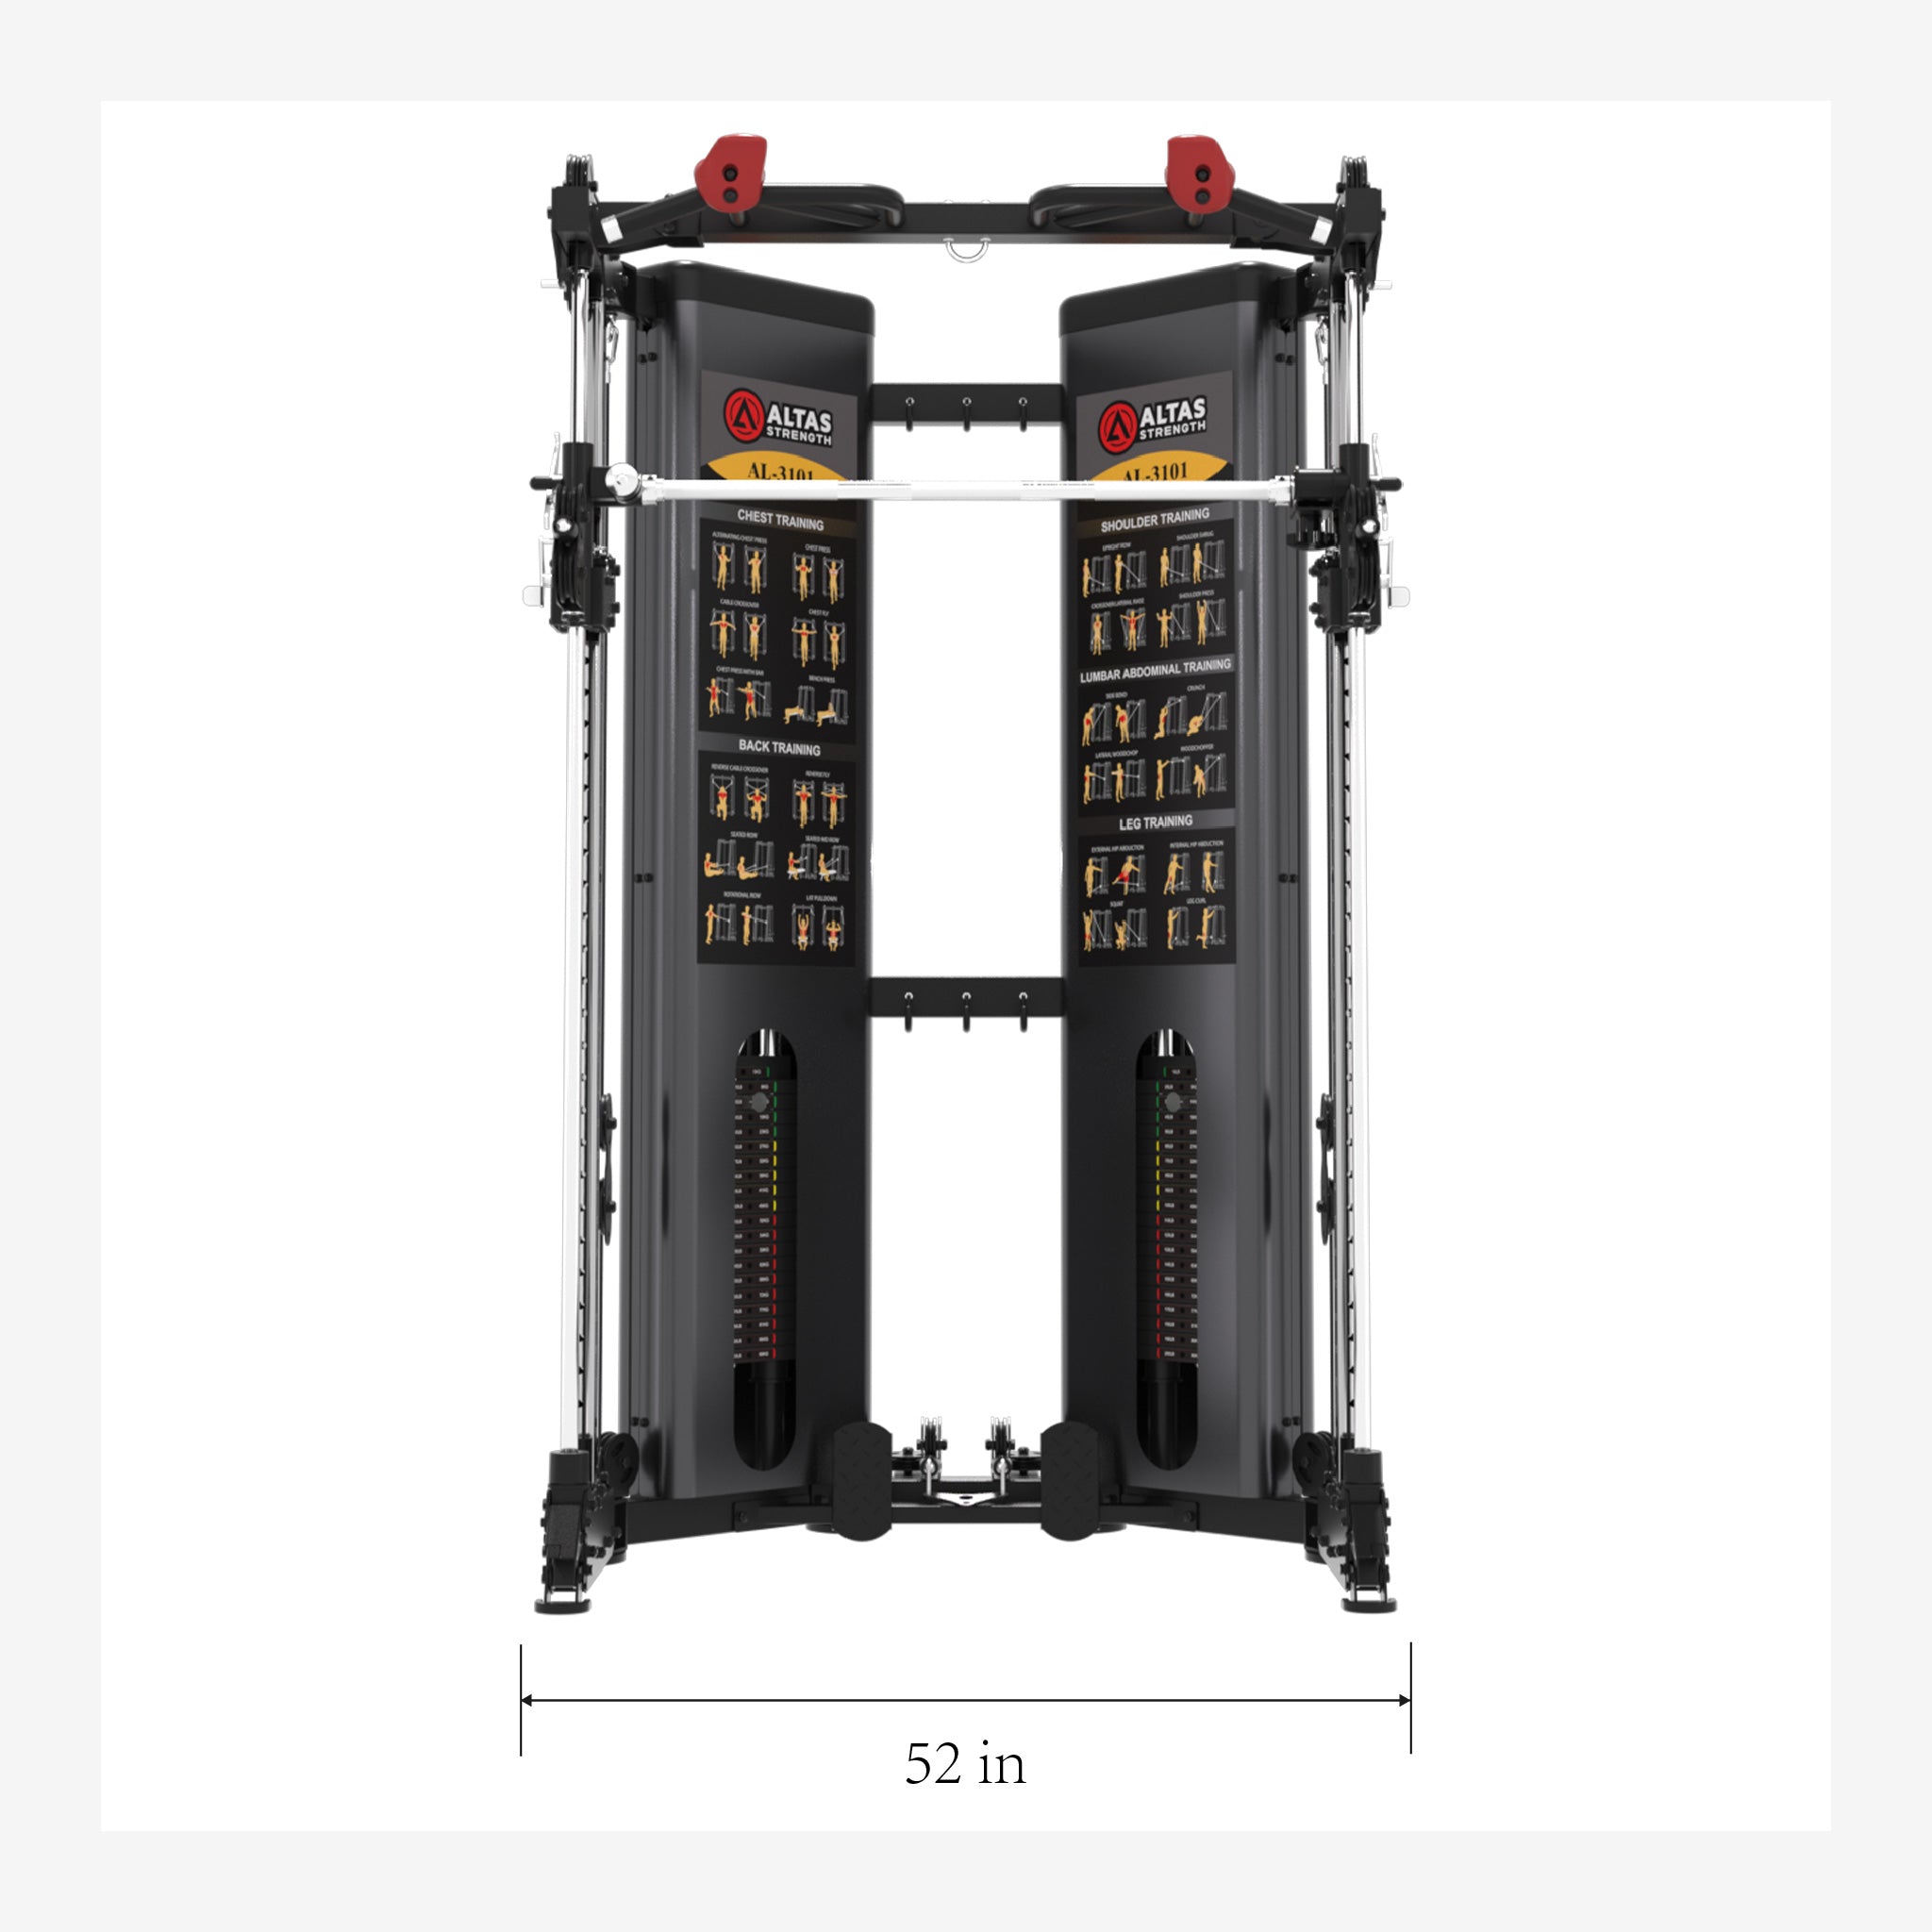 Folding Home Gym Smith Machine With Pulley System Gym Squat Rack AL-3101